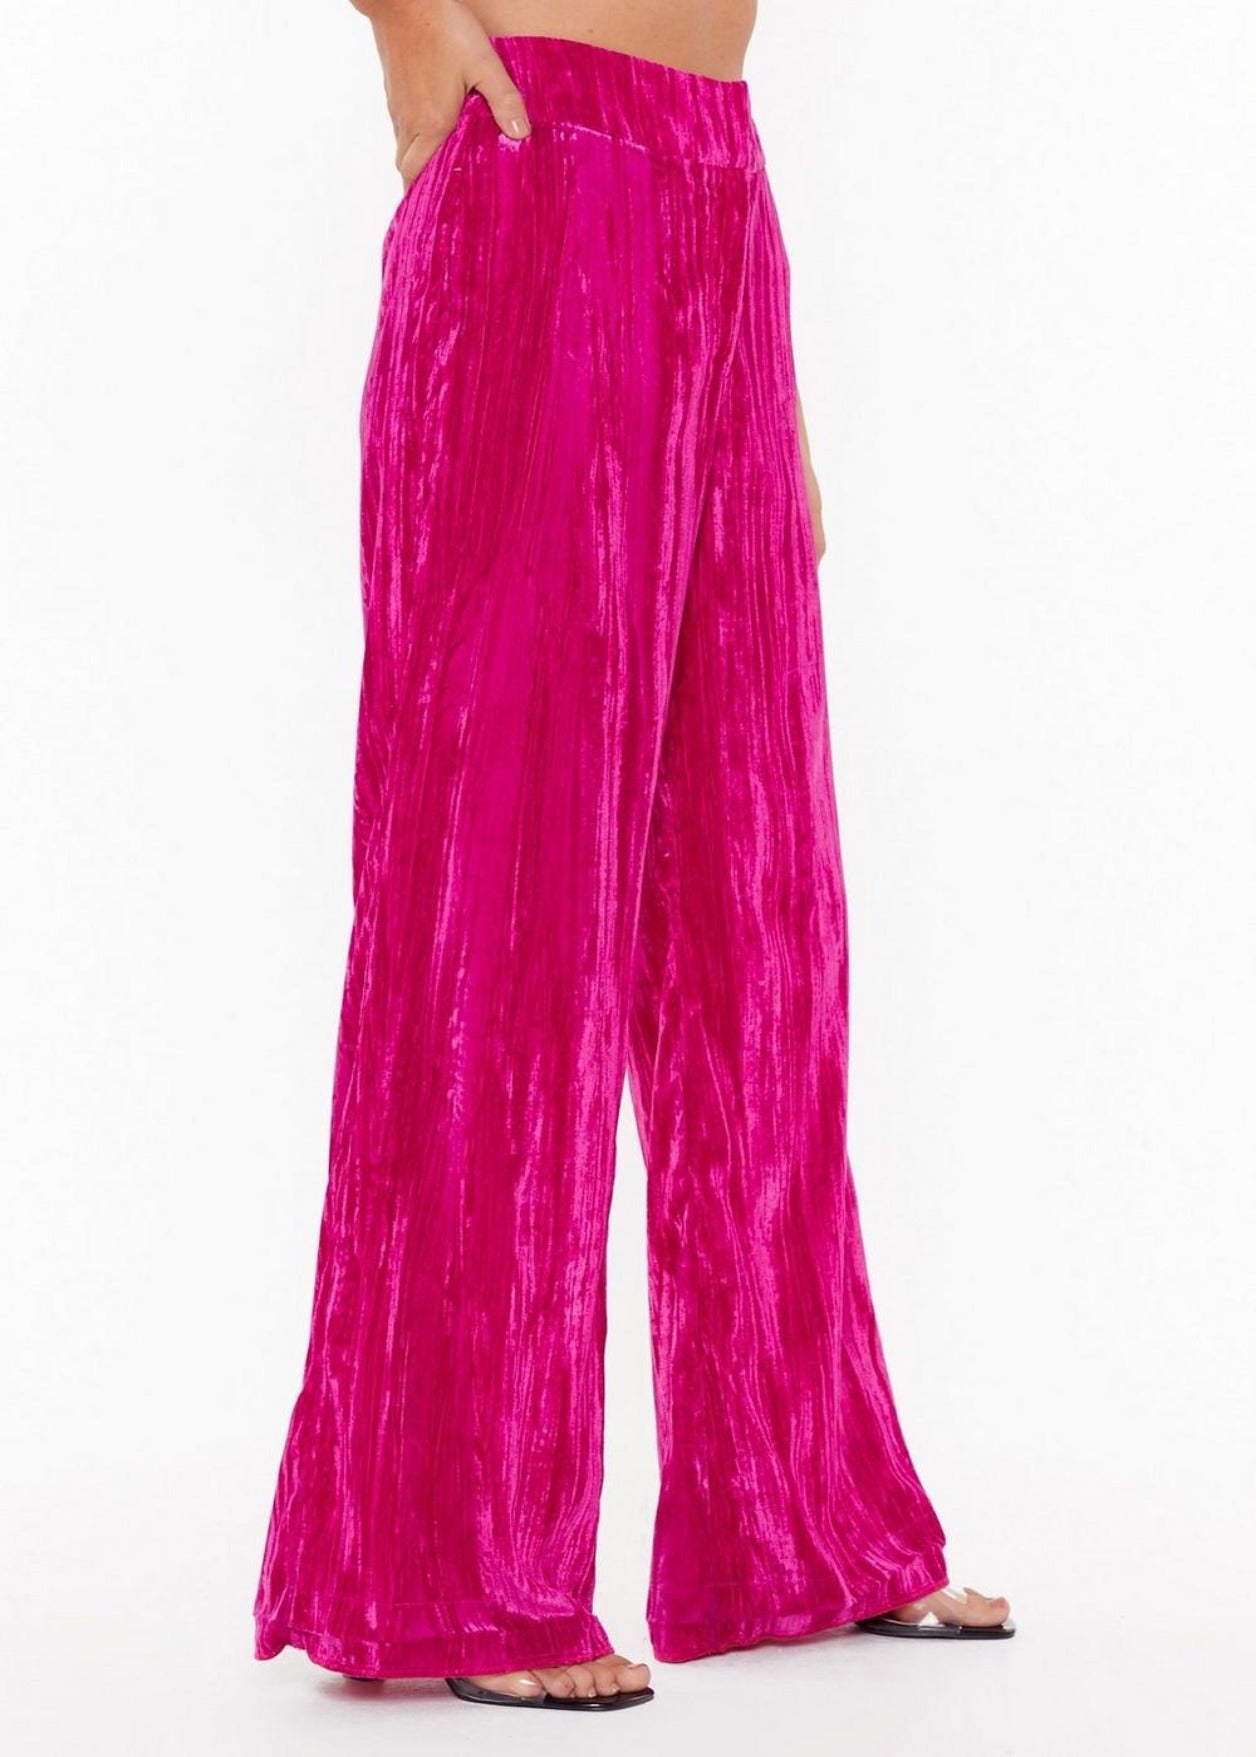 Hot Pink Velvet Wide Leg Pants from Pants collection you can buy now from Fashion And Icon online shop